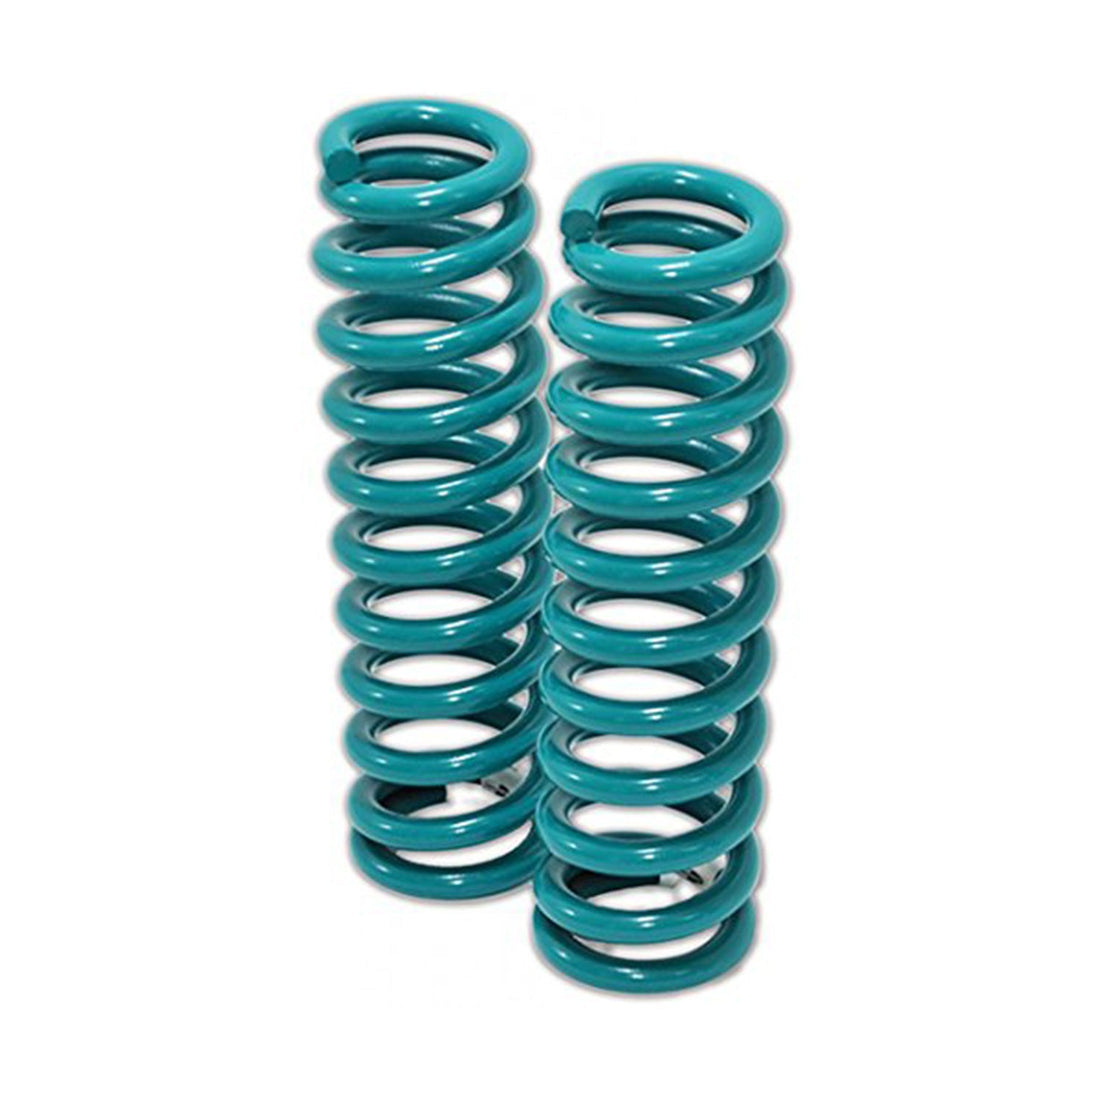 Dobinsons Front Lifted Coil Springs for Toyota Fortuner 4x4 Trucks and SUV's (C59-728)